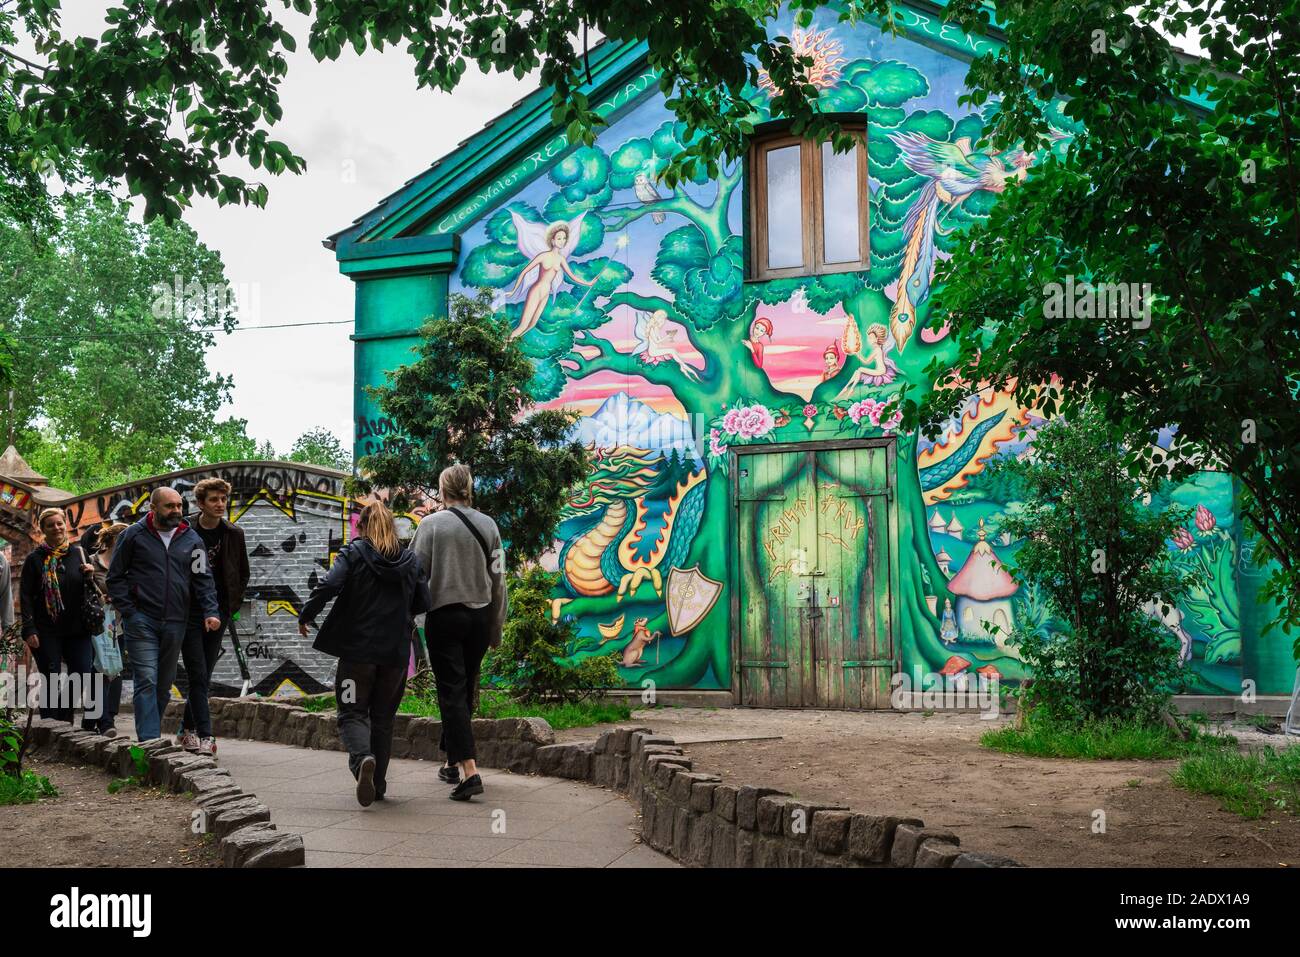 Christiania Copenhagen, view of people passing a colorful illustrated house inside the alternative Freetown area of Christiania, Copenhagen, Denmark. Stock Photo